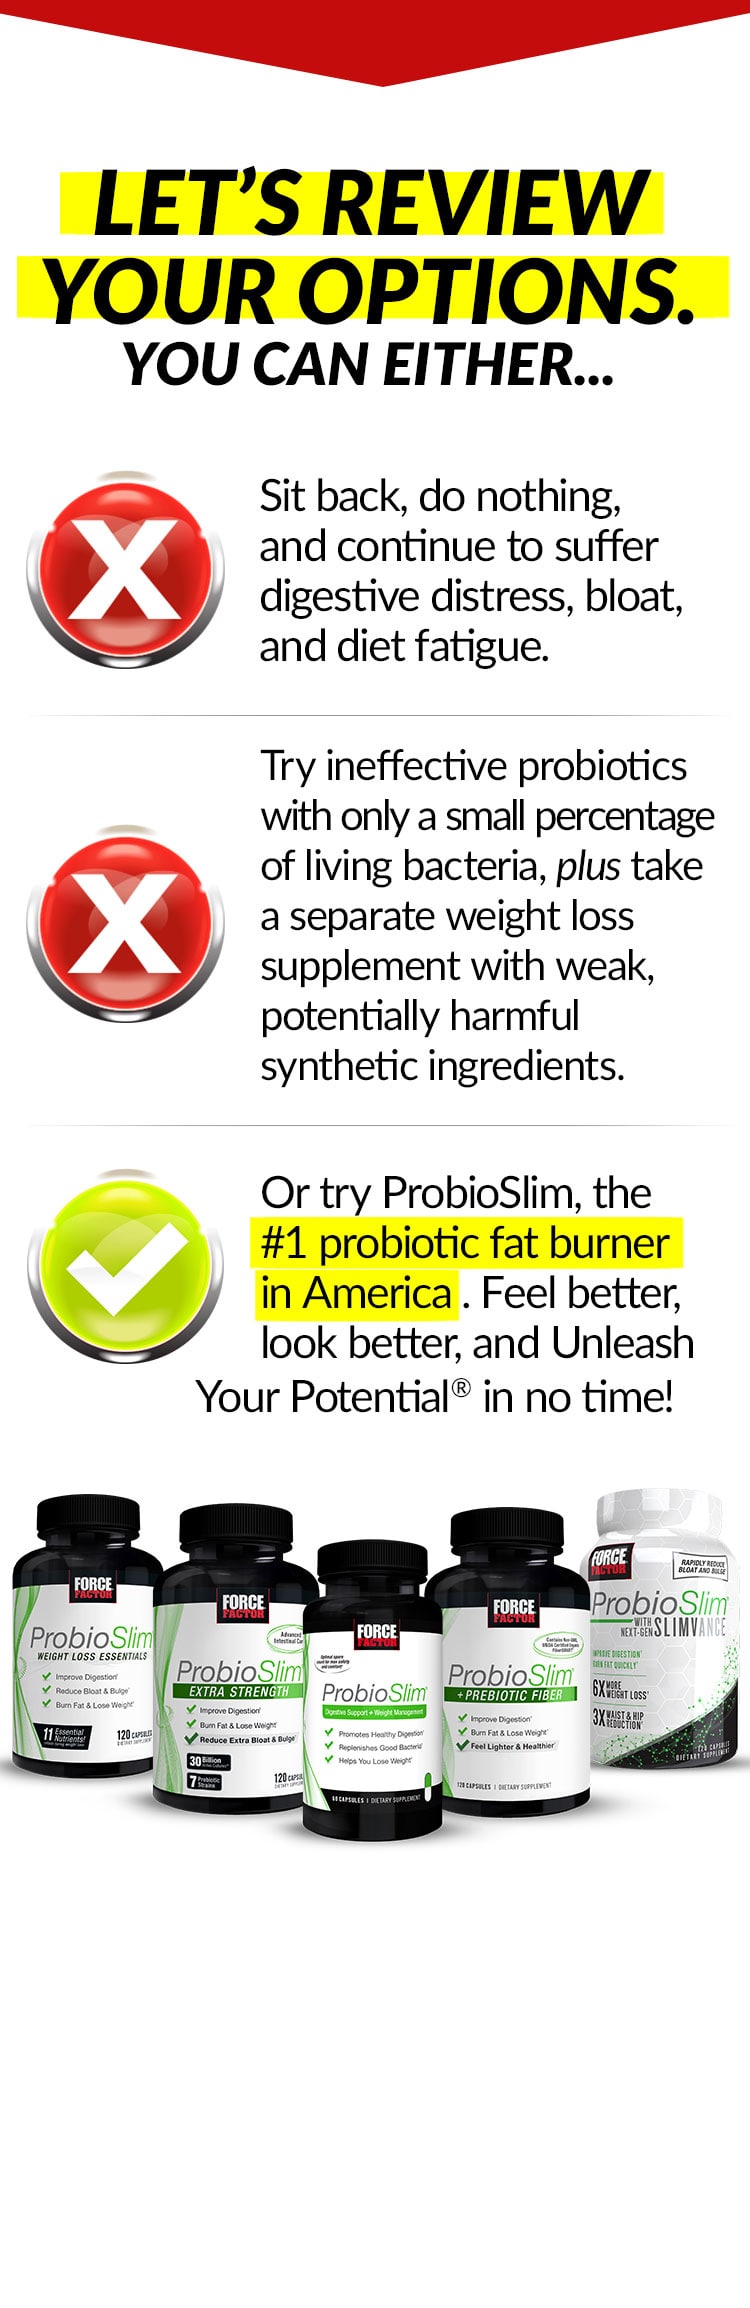 LET’S REVIEW YOUR OPTIONS. YOU CAN EITHER... Sit back, do nothing, and continue to suffer digestive distress, bloat, and diet fatigue. Try ineffective probiotics with only a small percentage of living bacteria, plus take a separate weight loss supplement with weak, potentially harmful synthetic ingredients. Or try ProbioSlim, the #1 probiotic fat burner in America. Feel better, look better, and Unleash Your Potential® in no time!